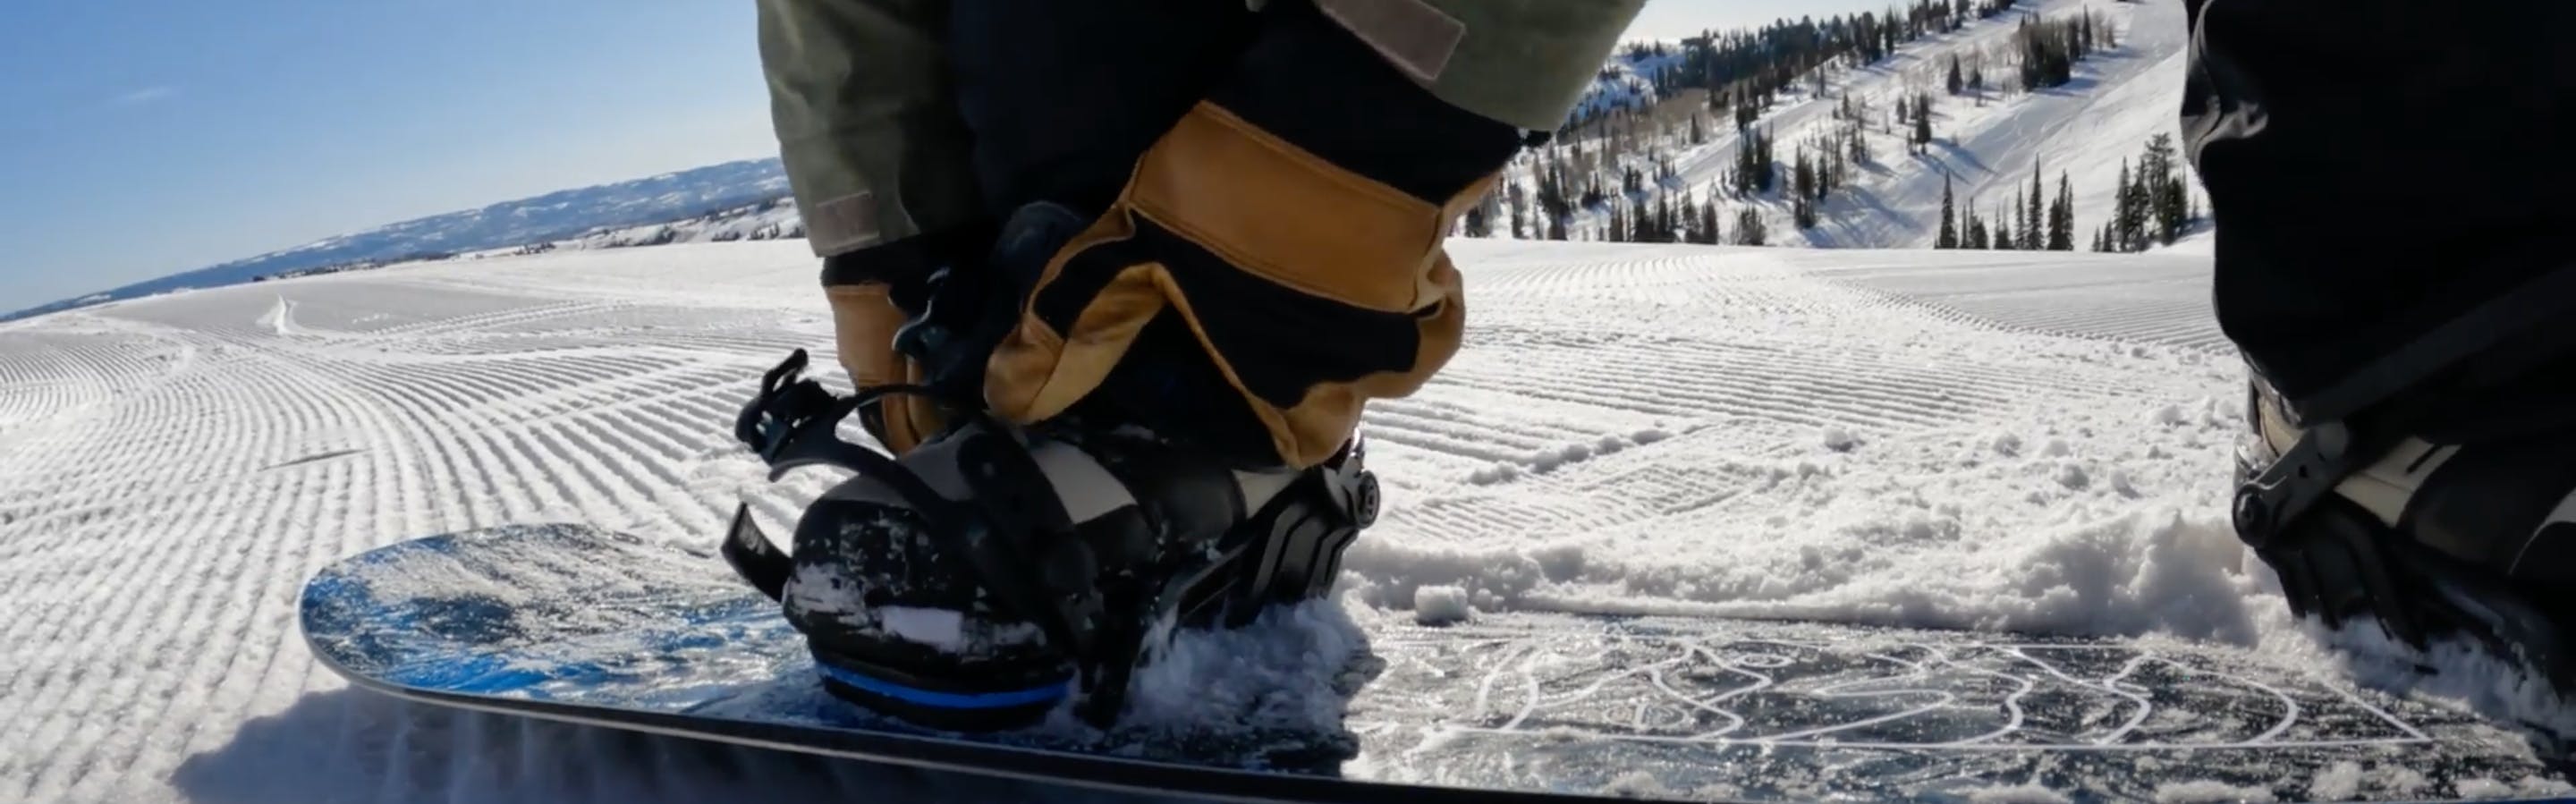 A snowboarder strapping into a snowboard. 